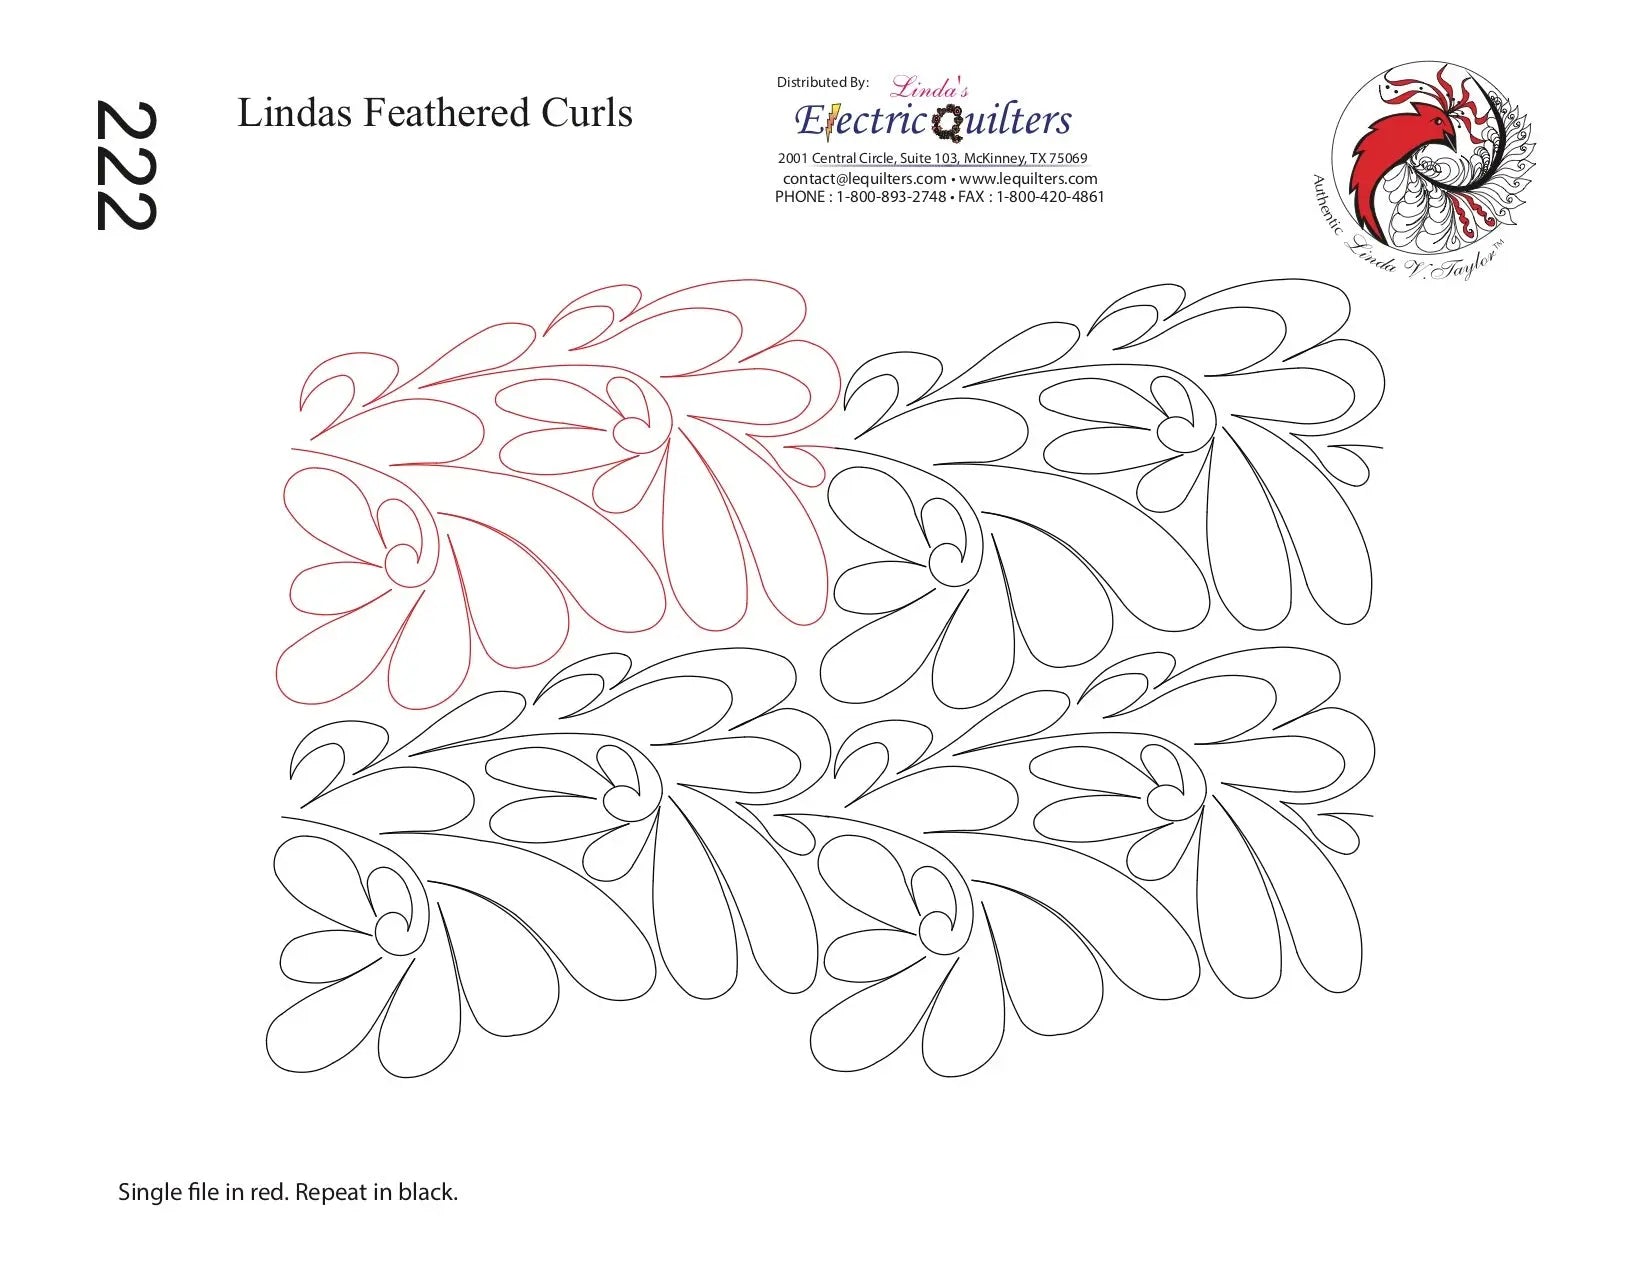 222 Lindas Feathered Curls Pantograph by Linda V. Taylor - Linda's Electric Quilters